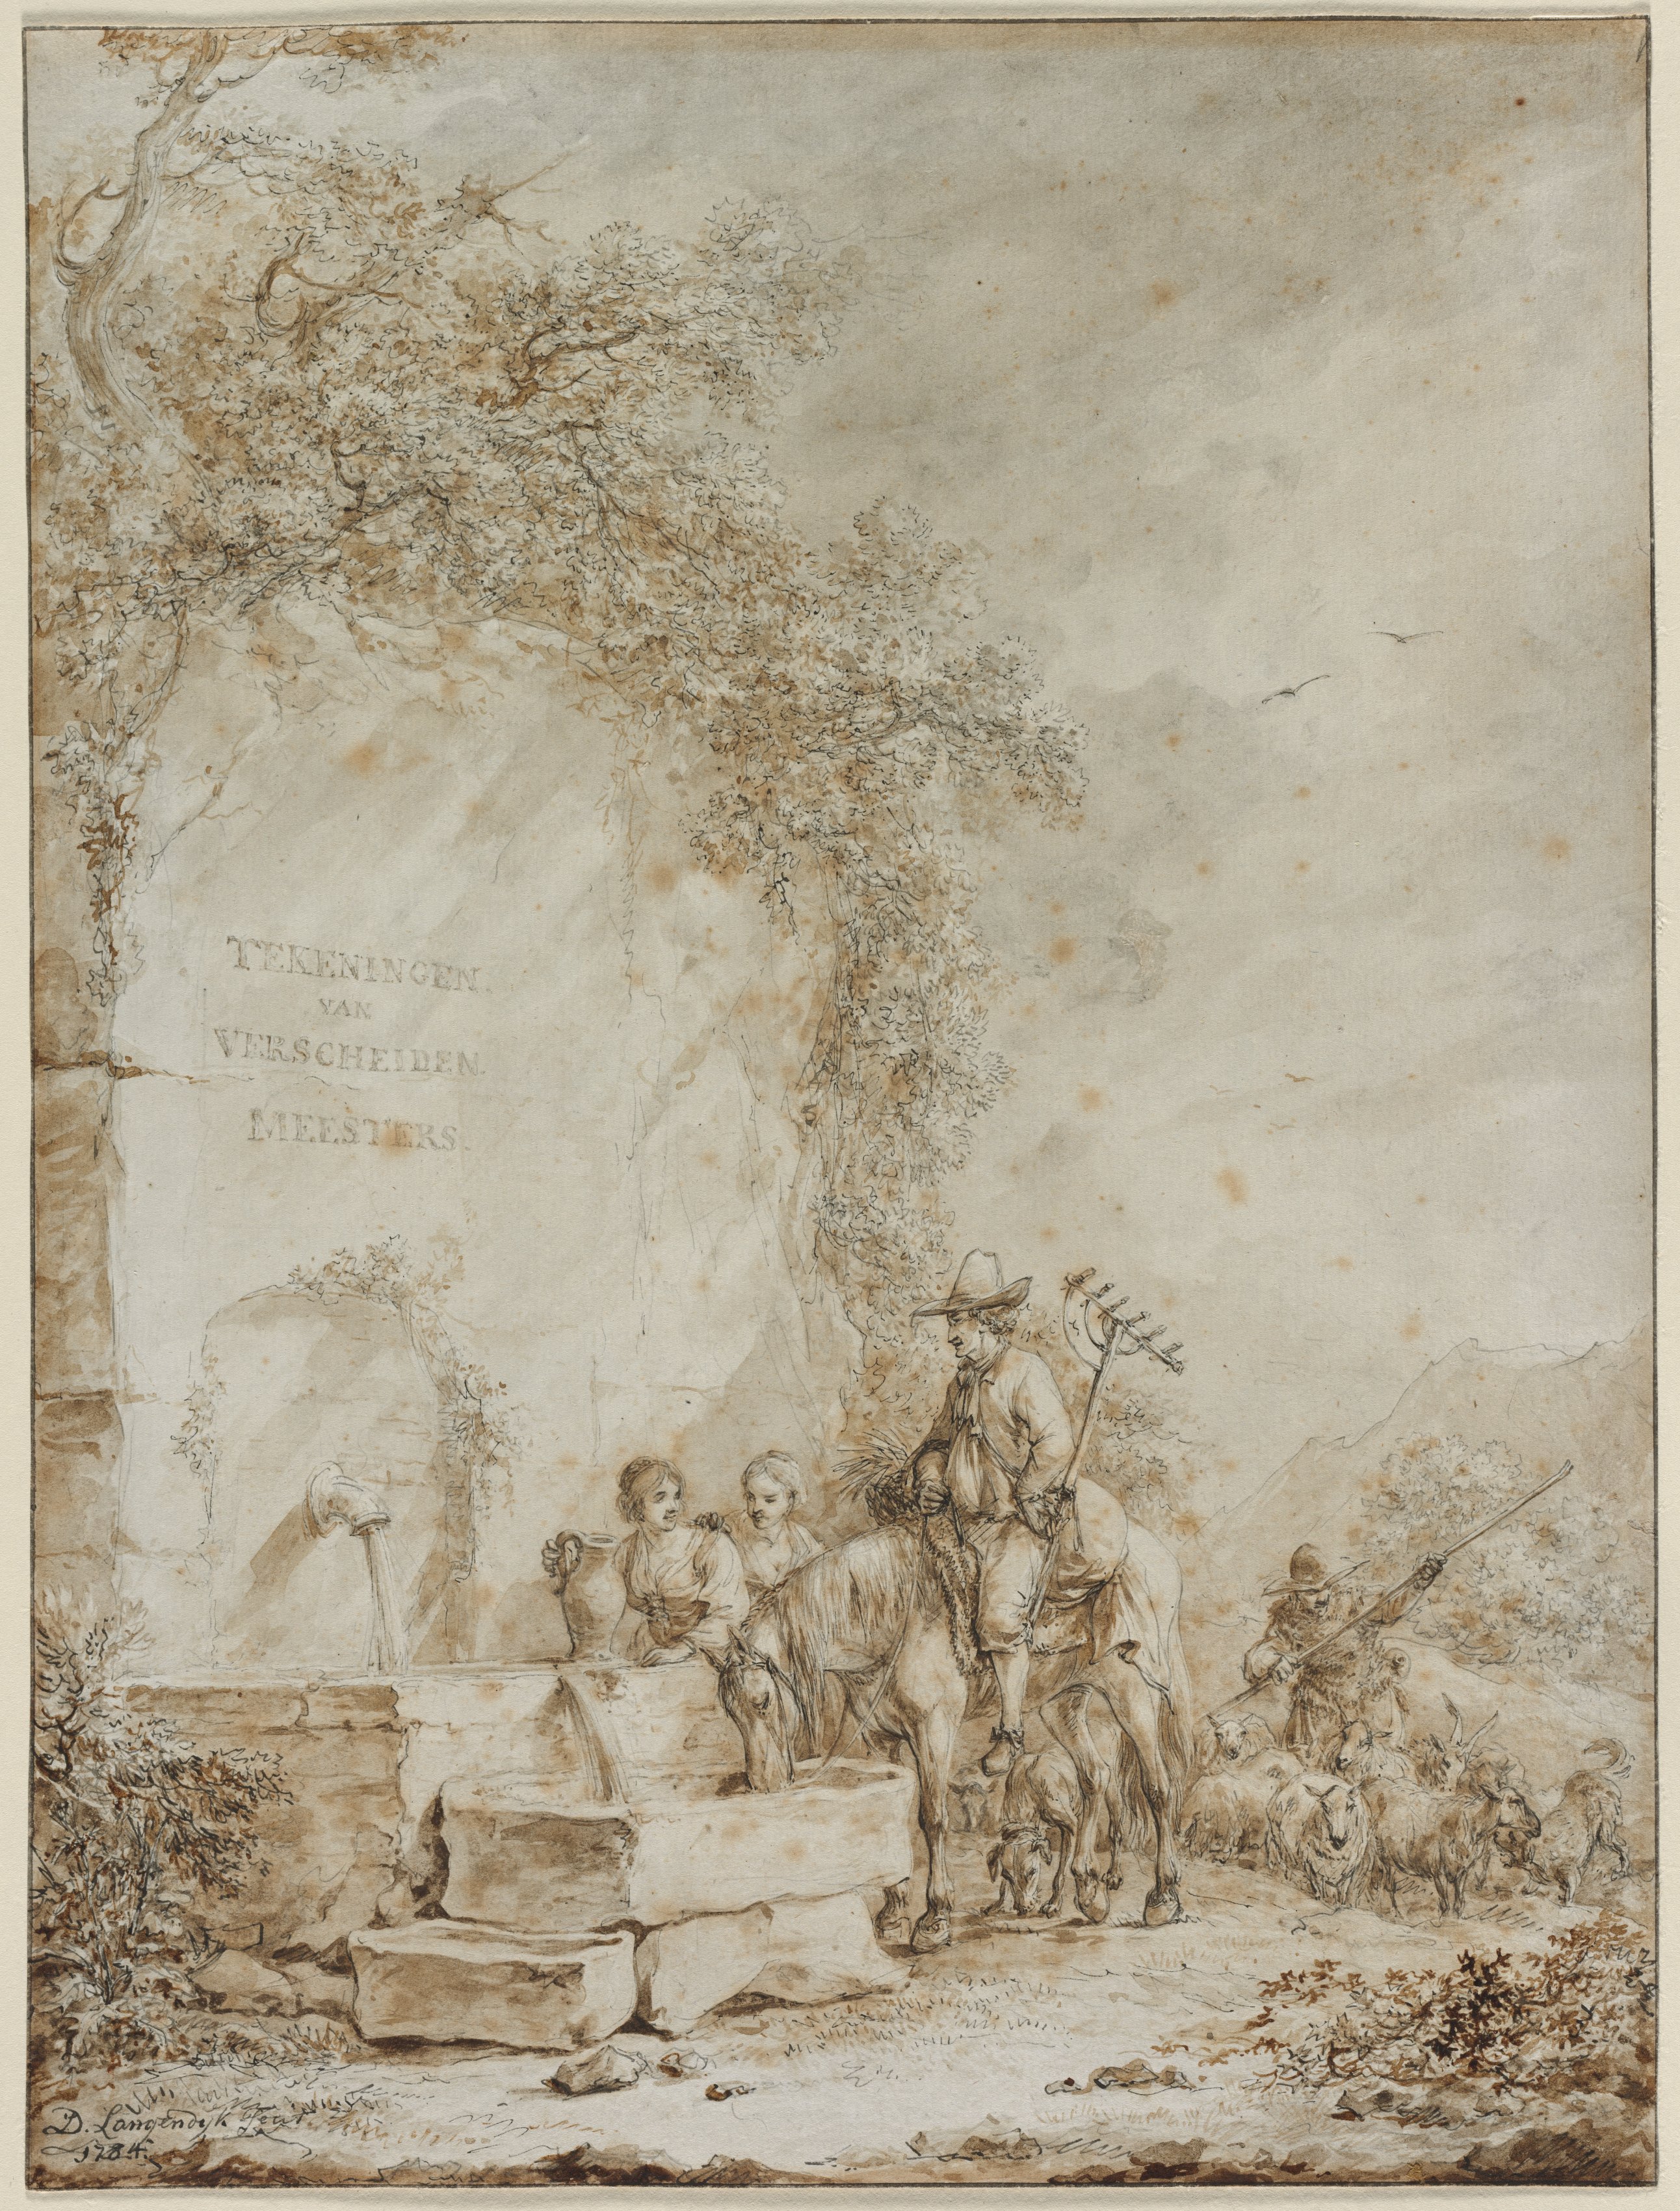 Frontispiece for an Album of Drawings: Peasants at a Fountain (recto)